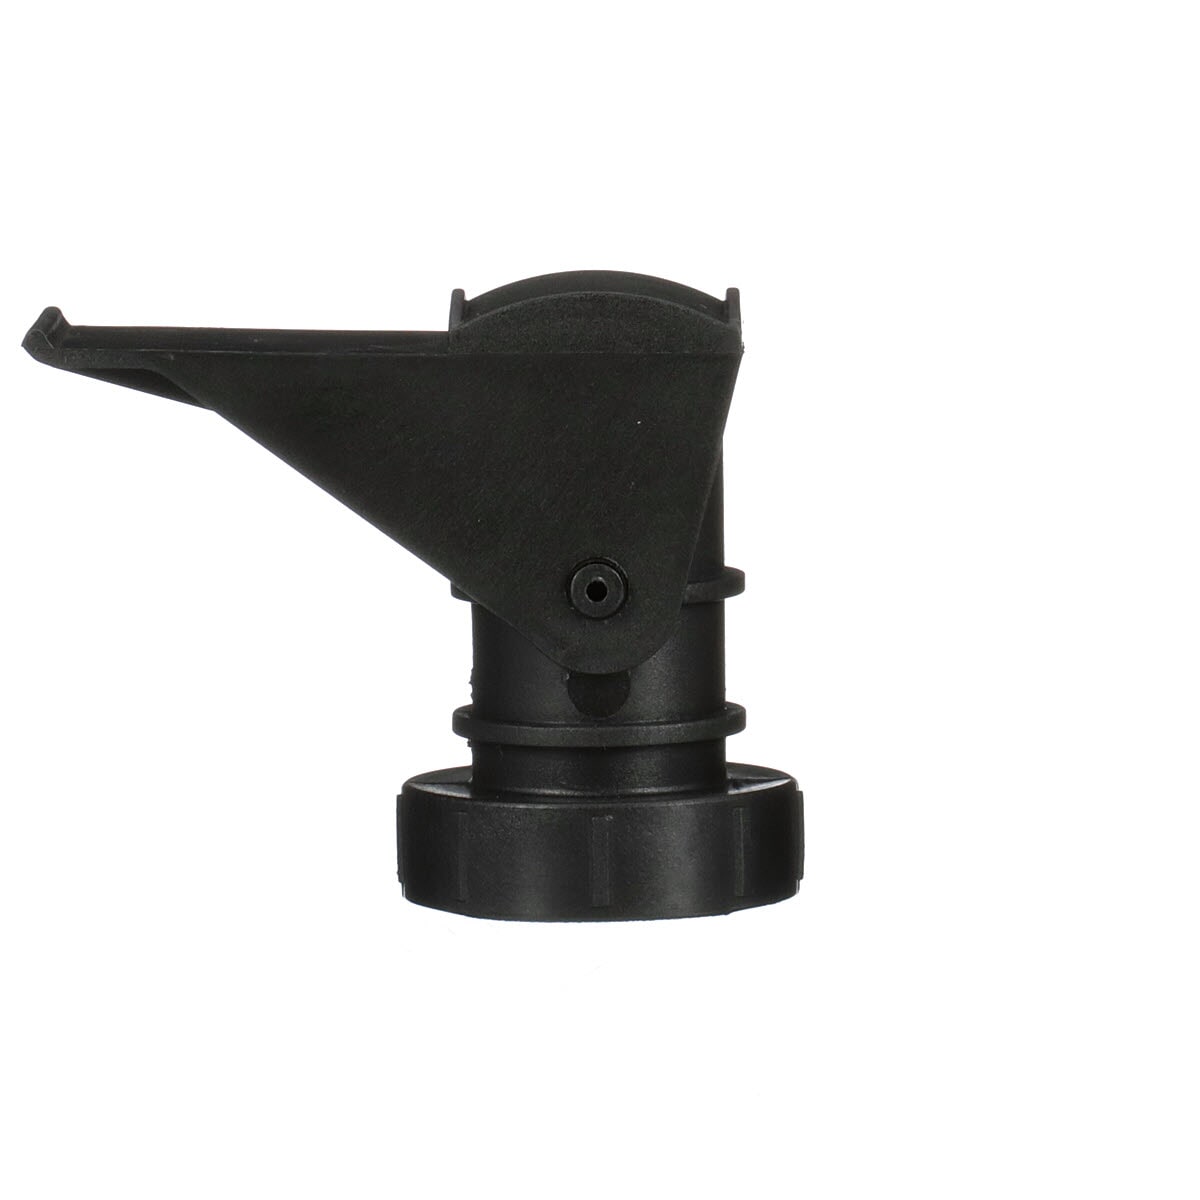 3M 7010412184 Dispenser Valve, For Use With 5 gal containers of 3M Body Fillers, Plastic, Black